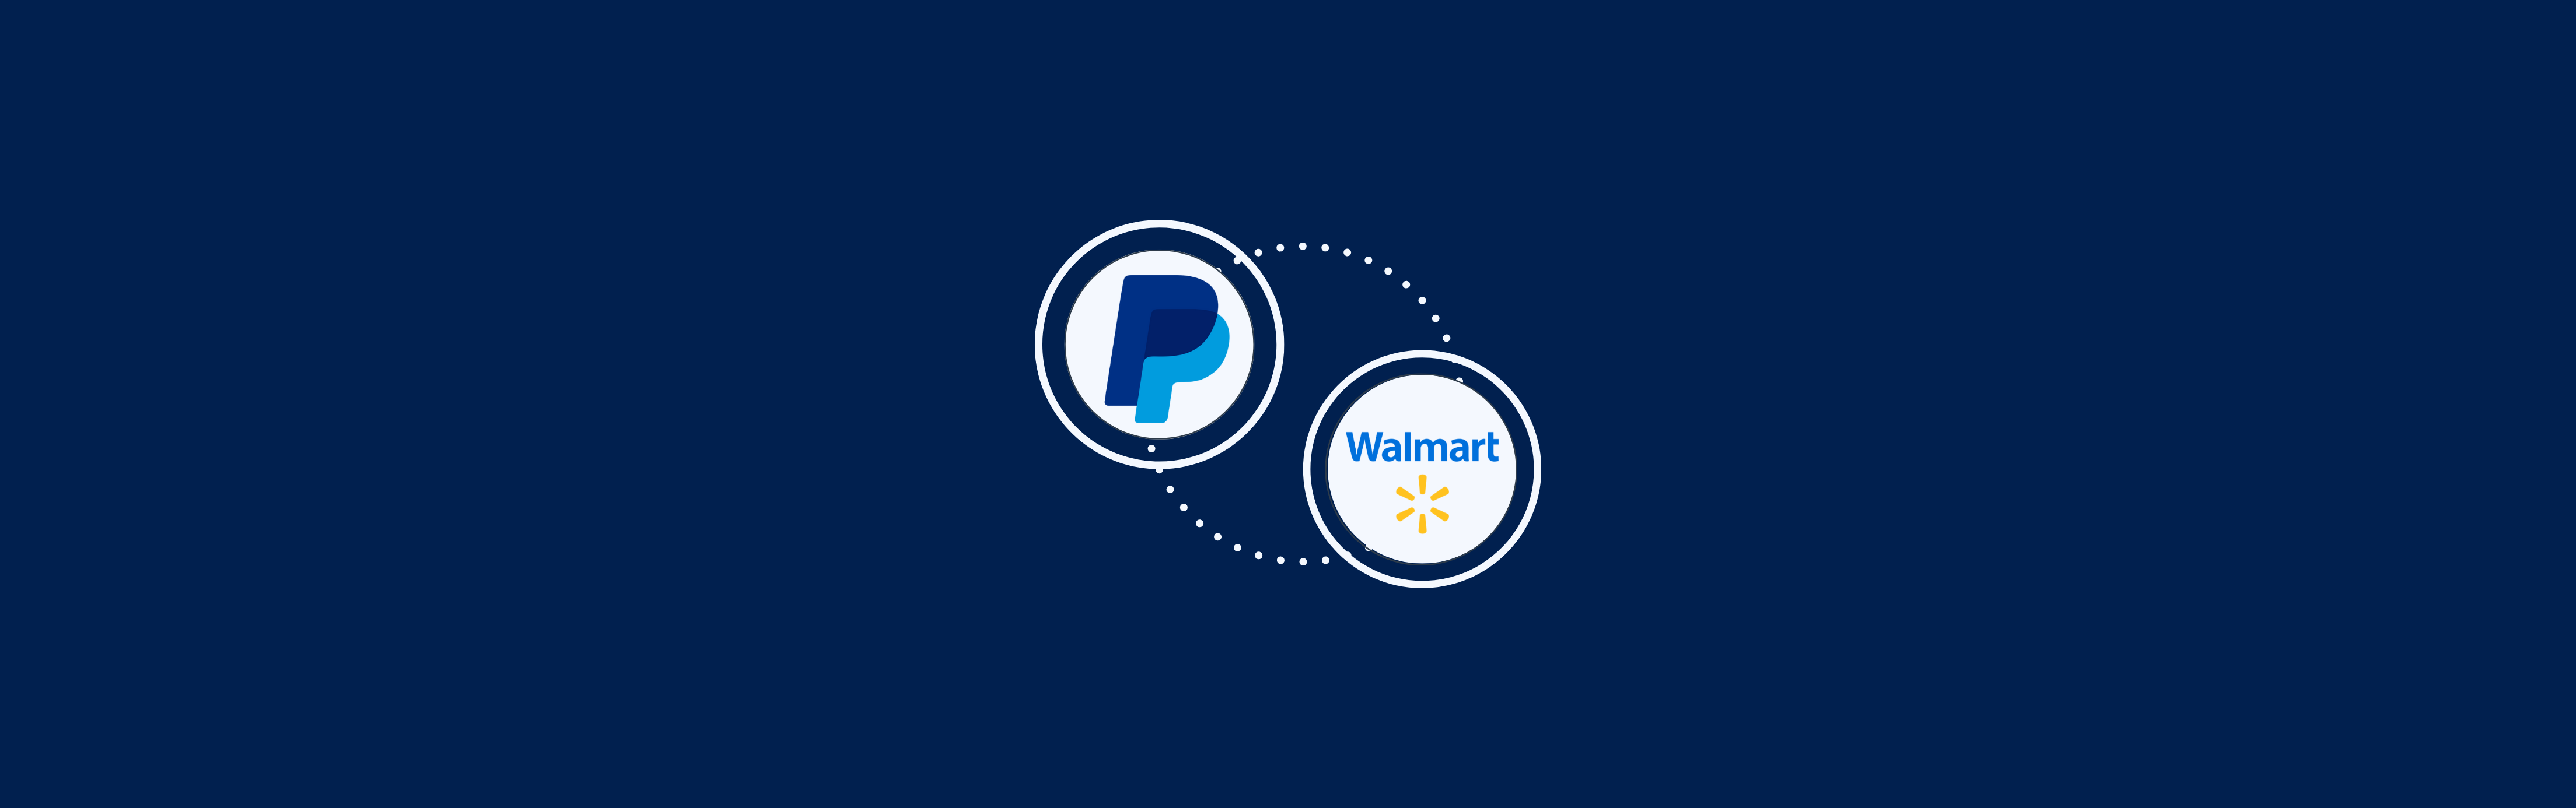 Does Walmart Accept PayPal? How to Use PayPal at Walmart